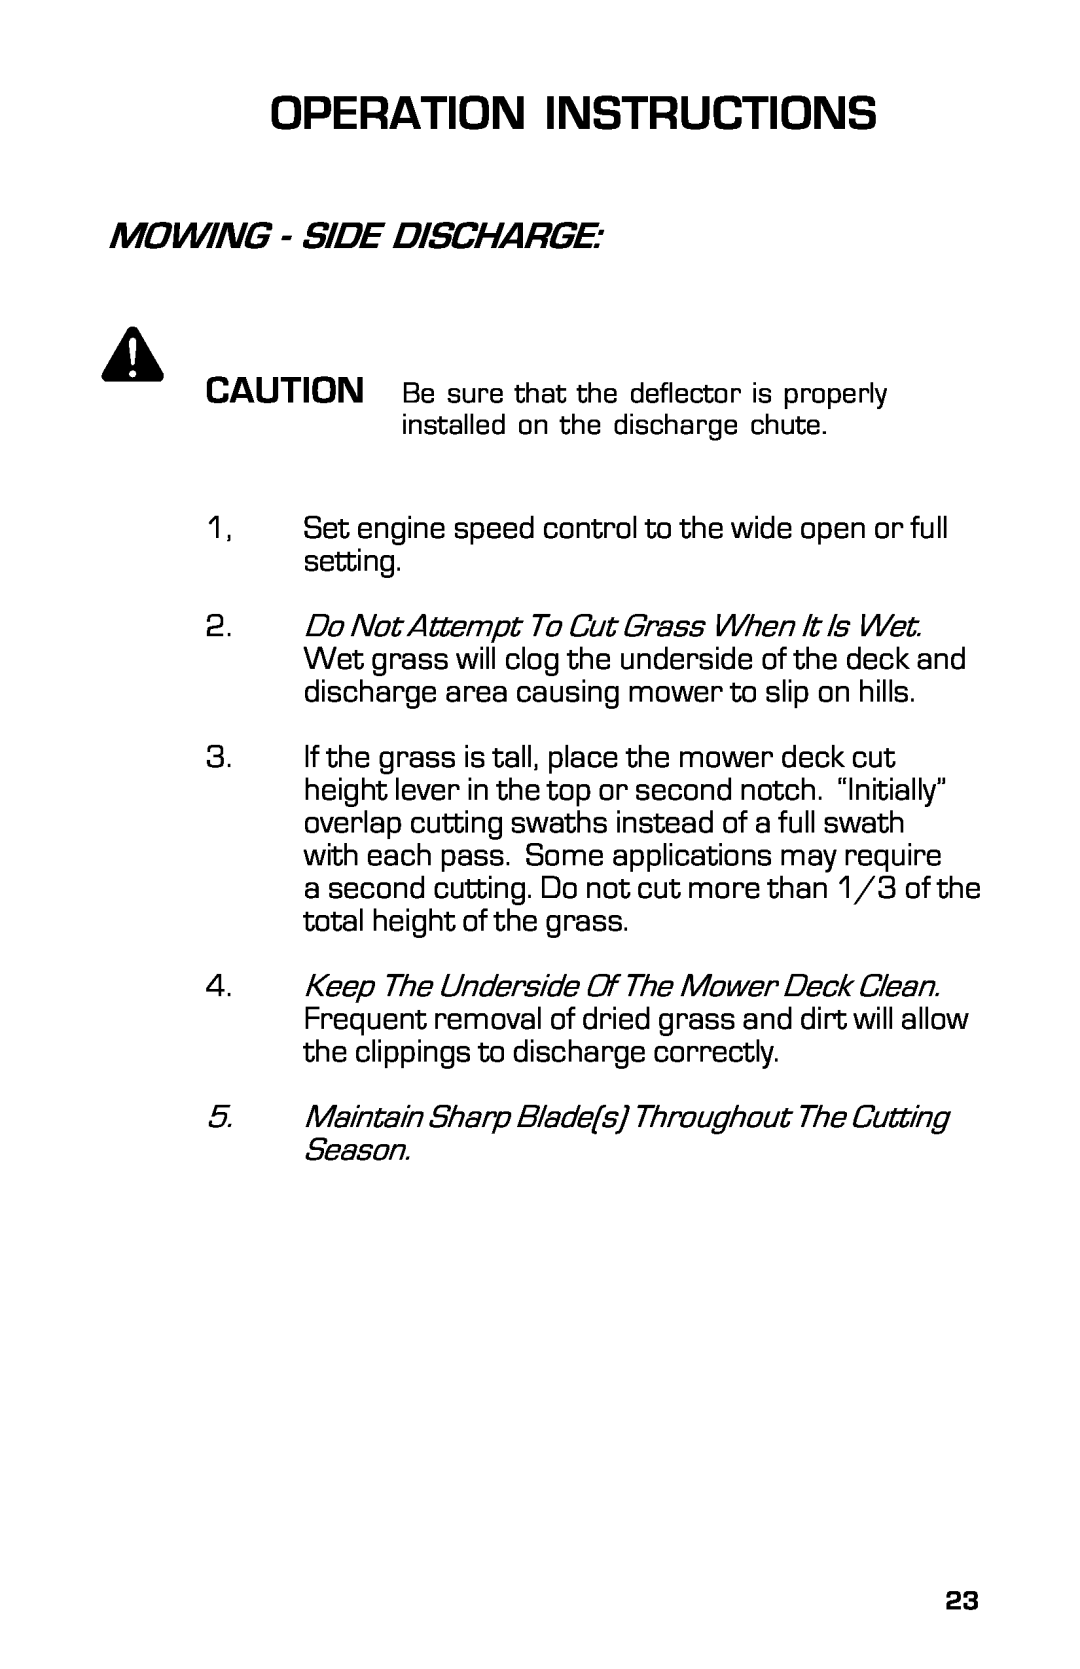 Dixon 3500 Series manual Mowing - Side Discharge, Operation Instructions 